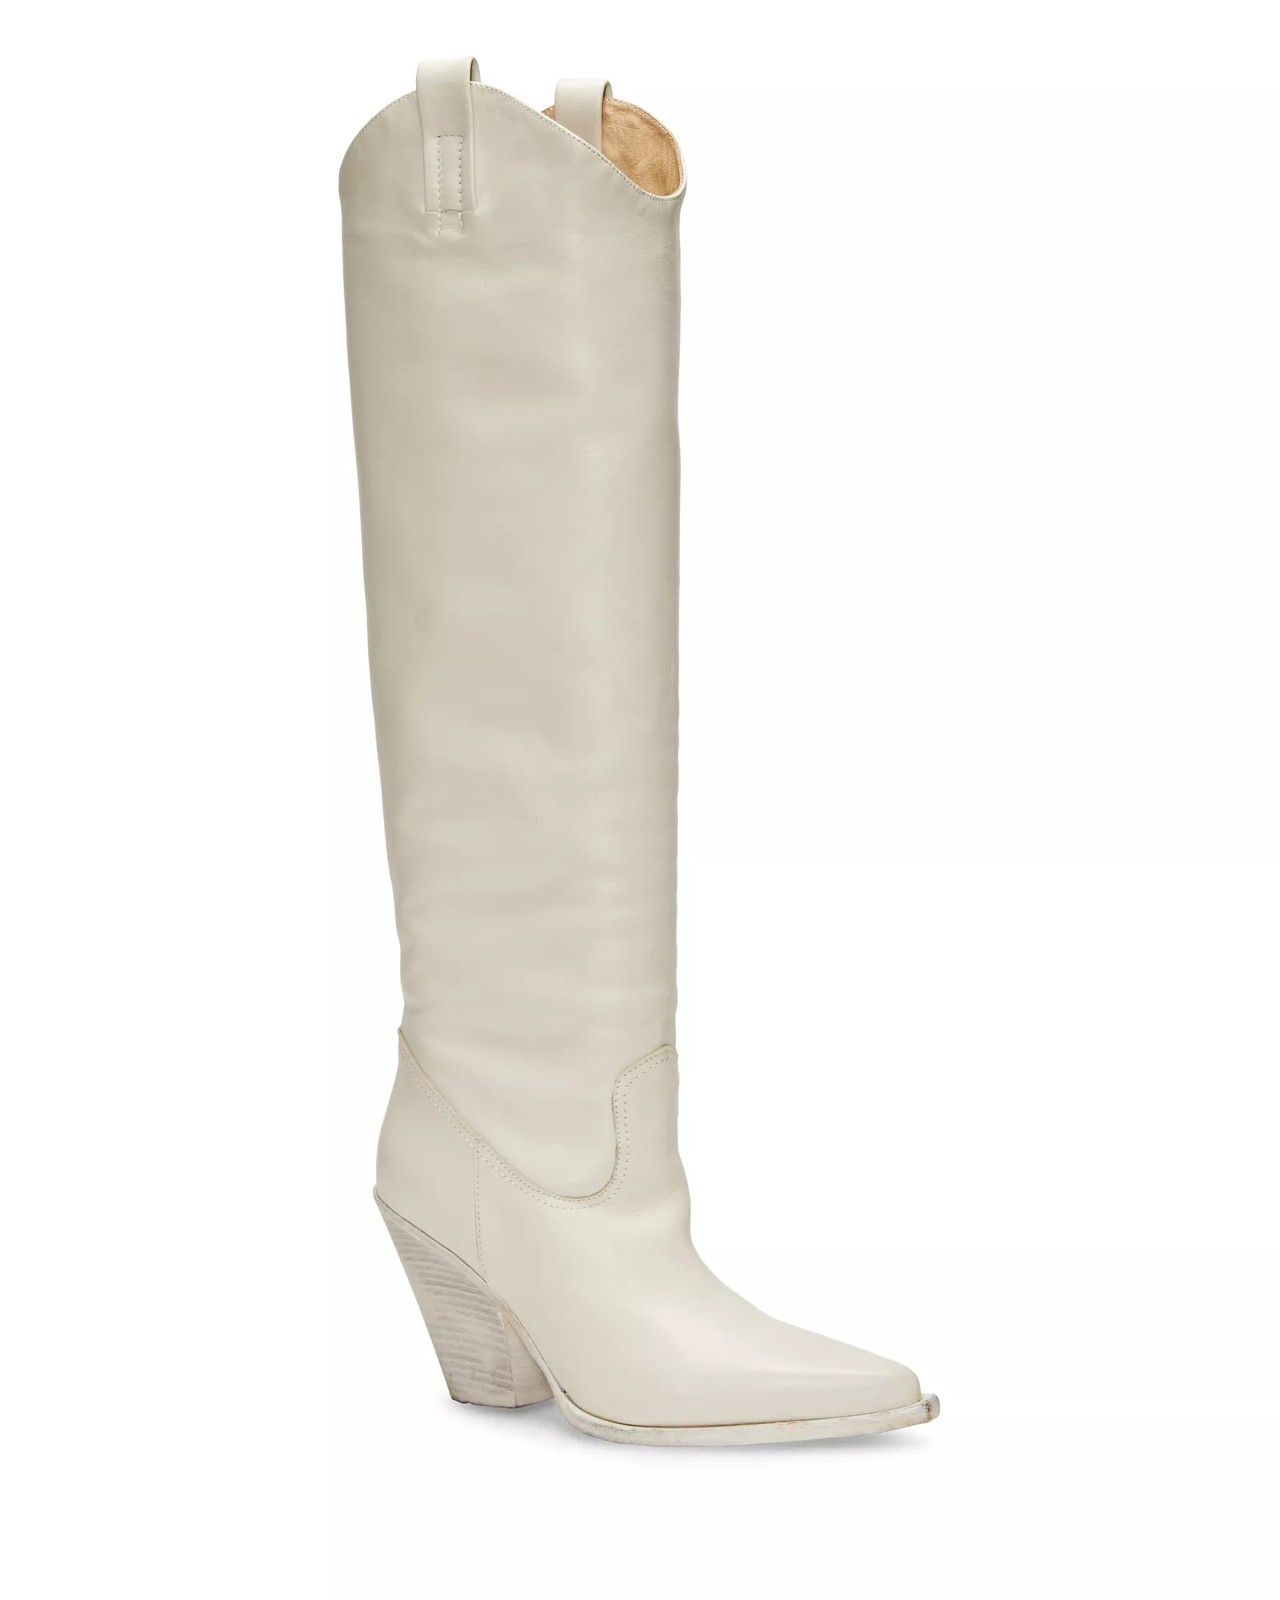 Vince Camuto Jessikah Boot | Vince Camuto